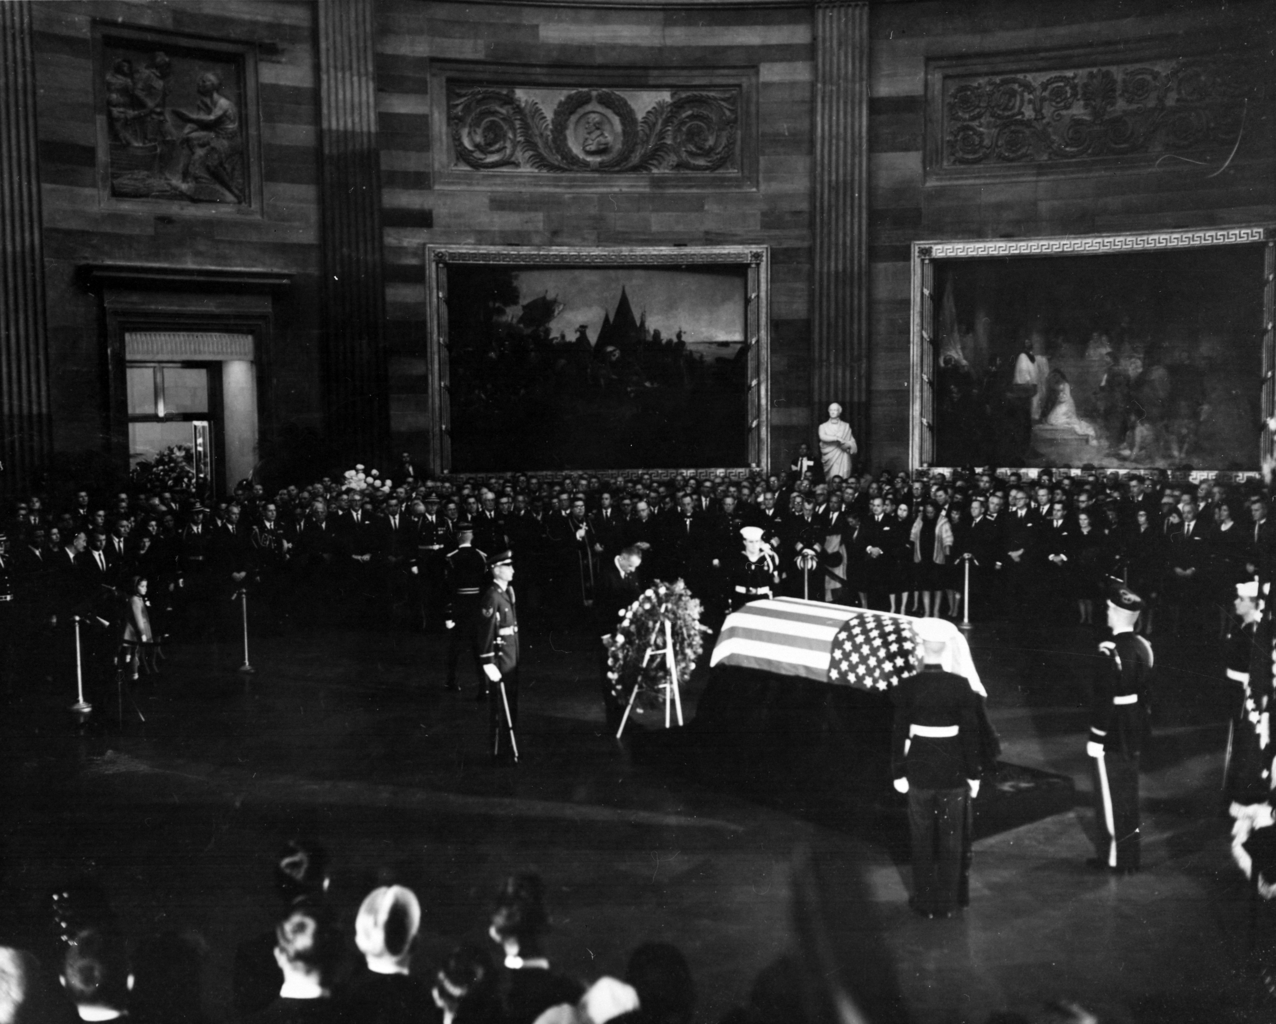 Photograph of President Lyndon B. Johnson placing a wreath before the flag-draped casket of President John F. Kennedy, during funeral services for Kennedy in the Capitol rotunda. (Public domain)